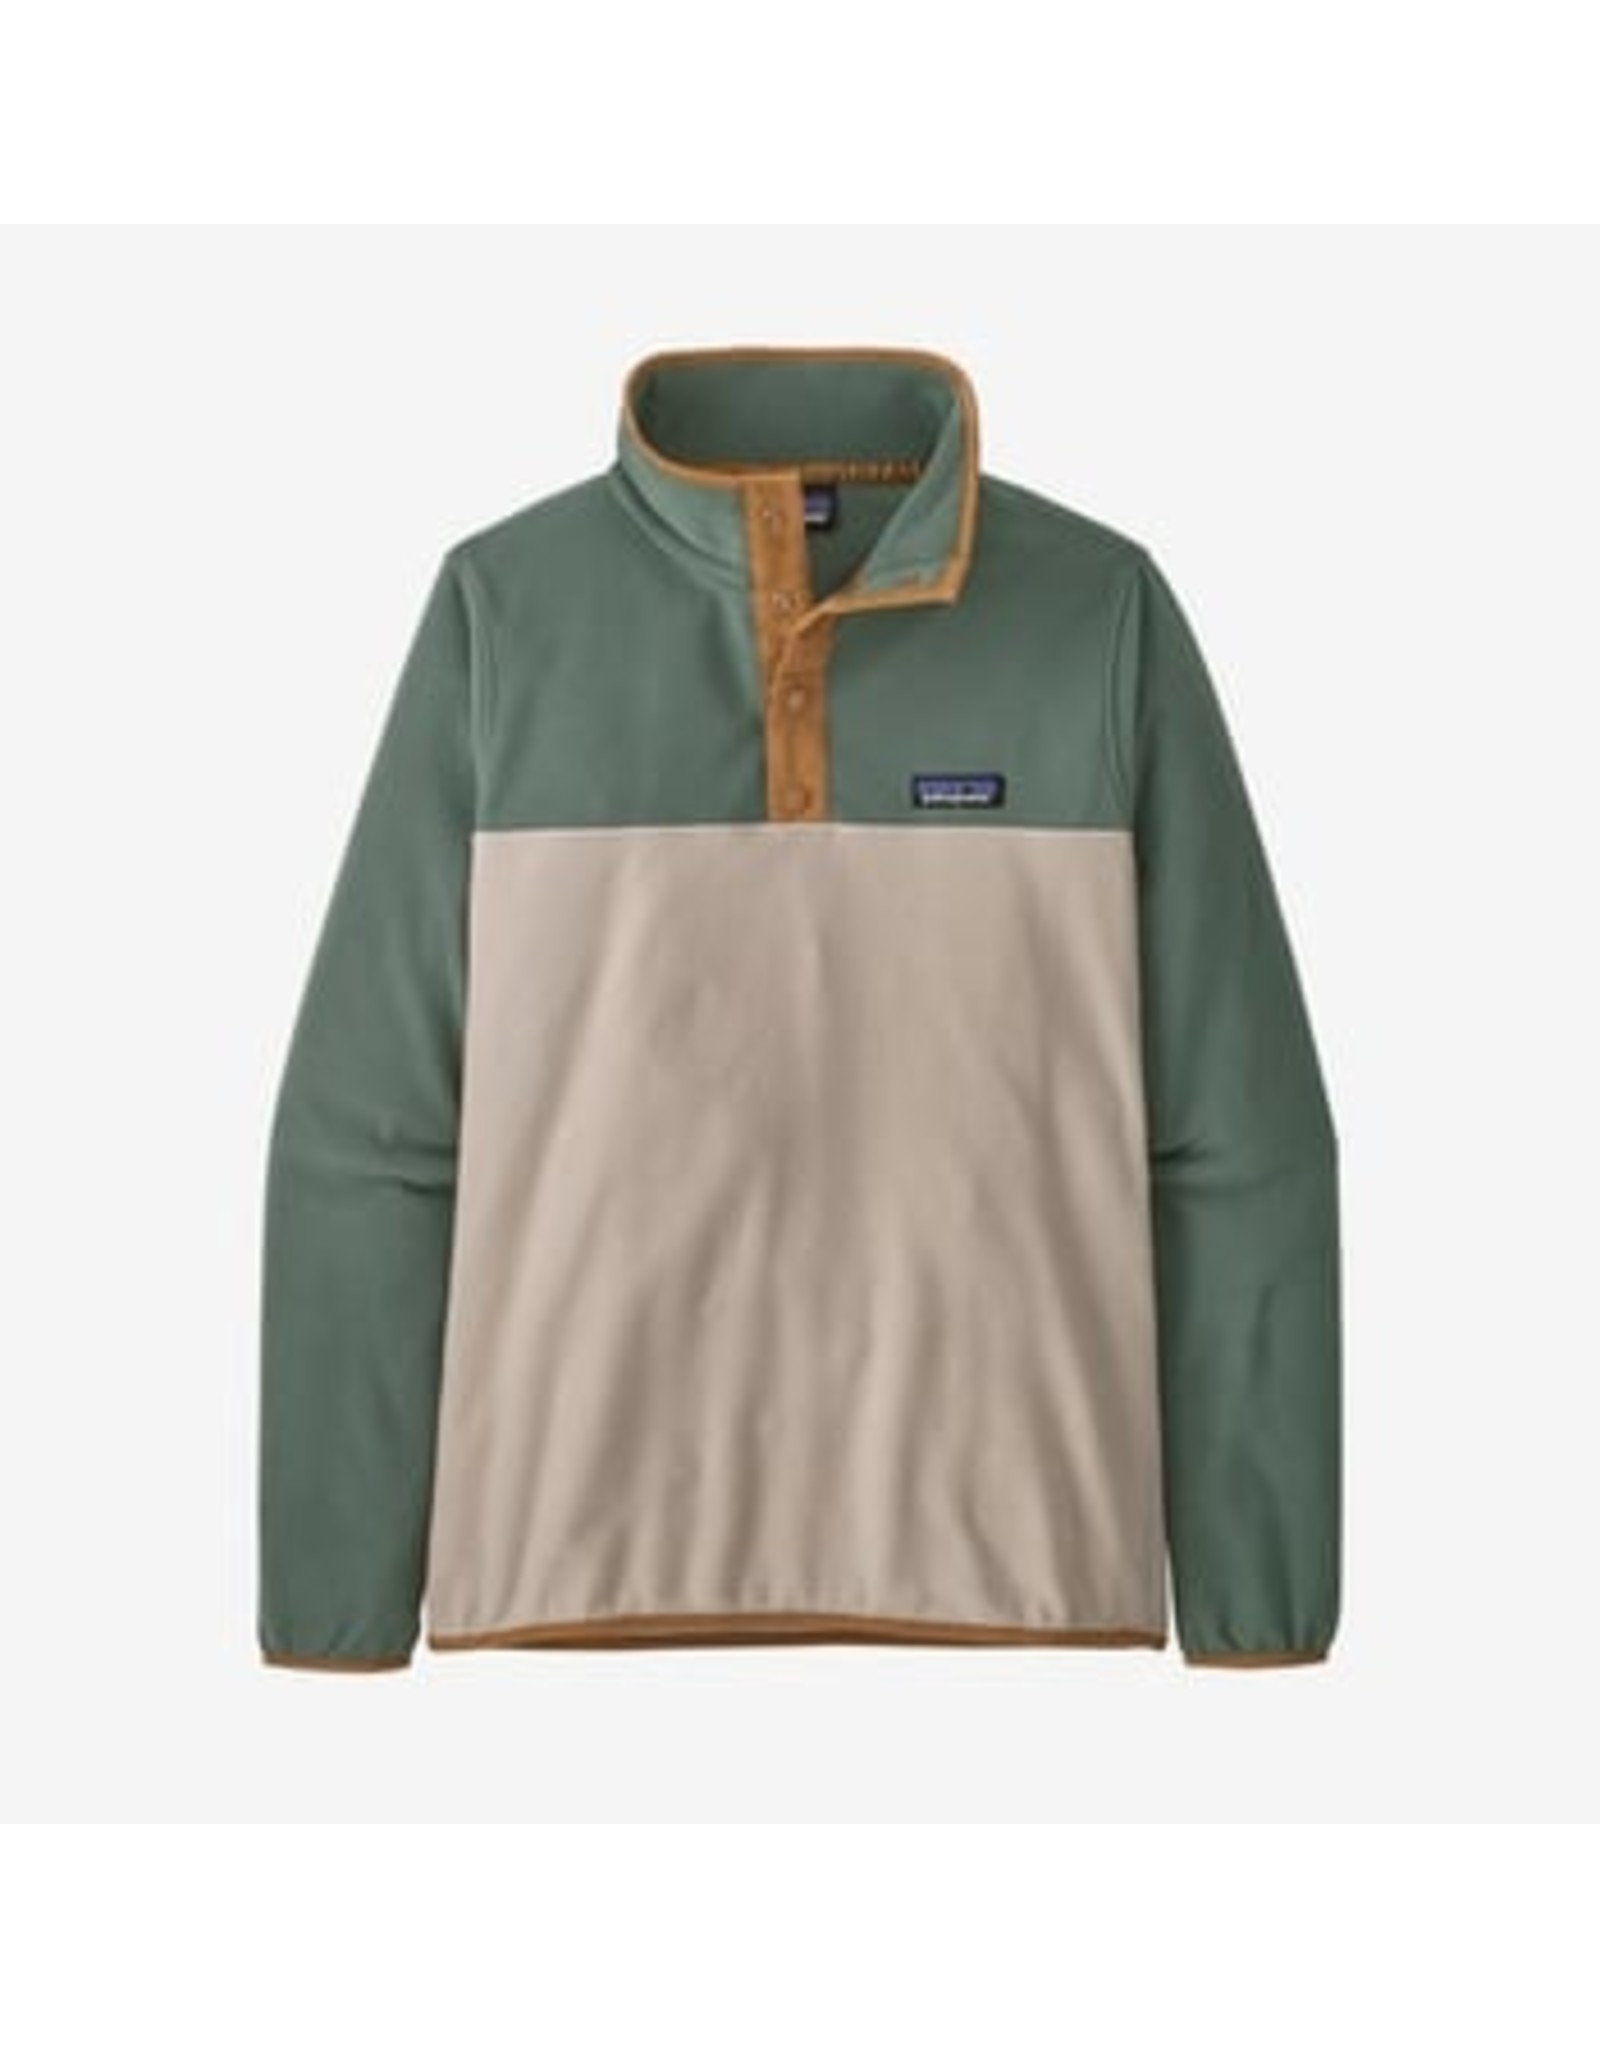 Patagonia W Micro D Snap-T Pullover - Pumice